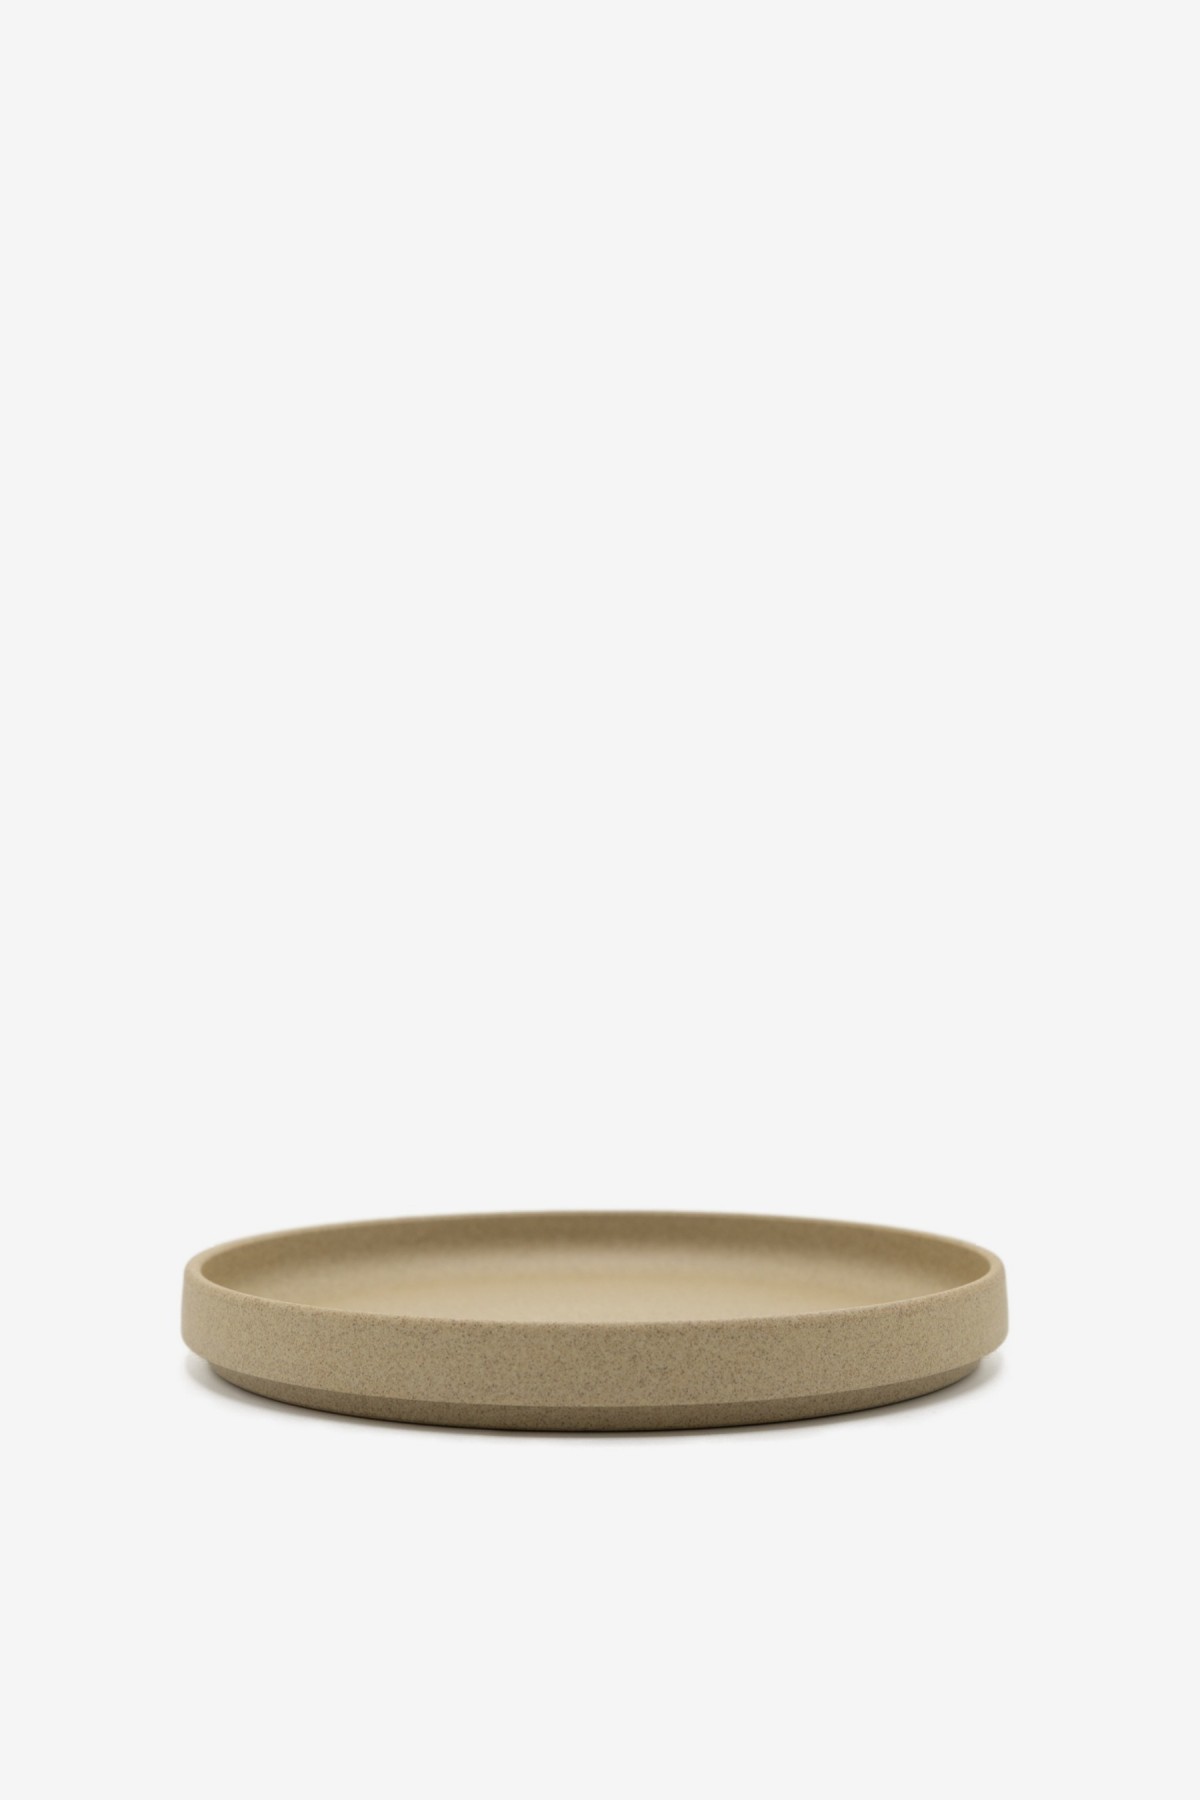 Hasami Porcelain Plate 185 in Sand